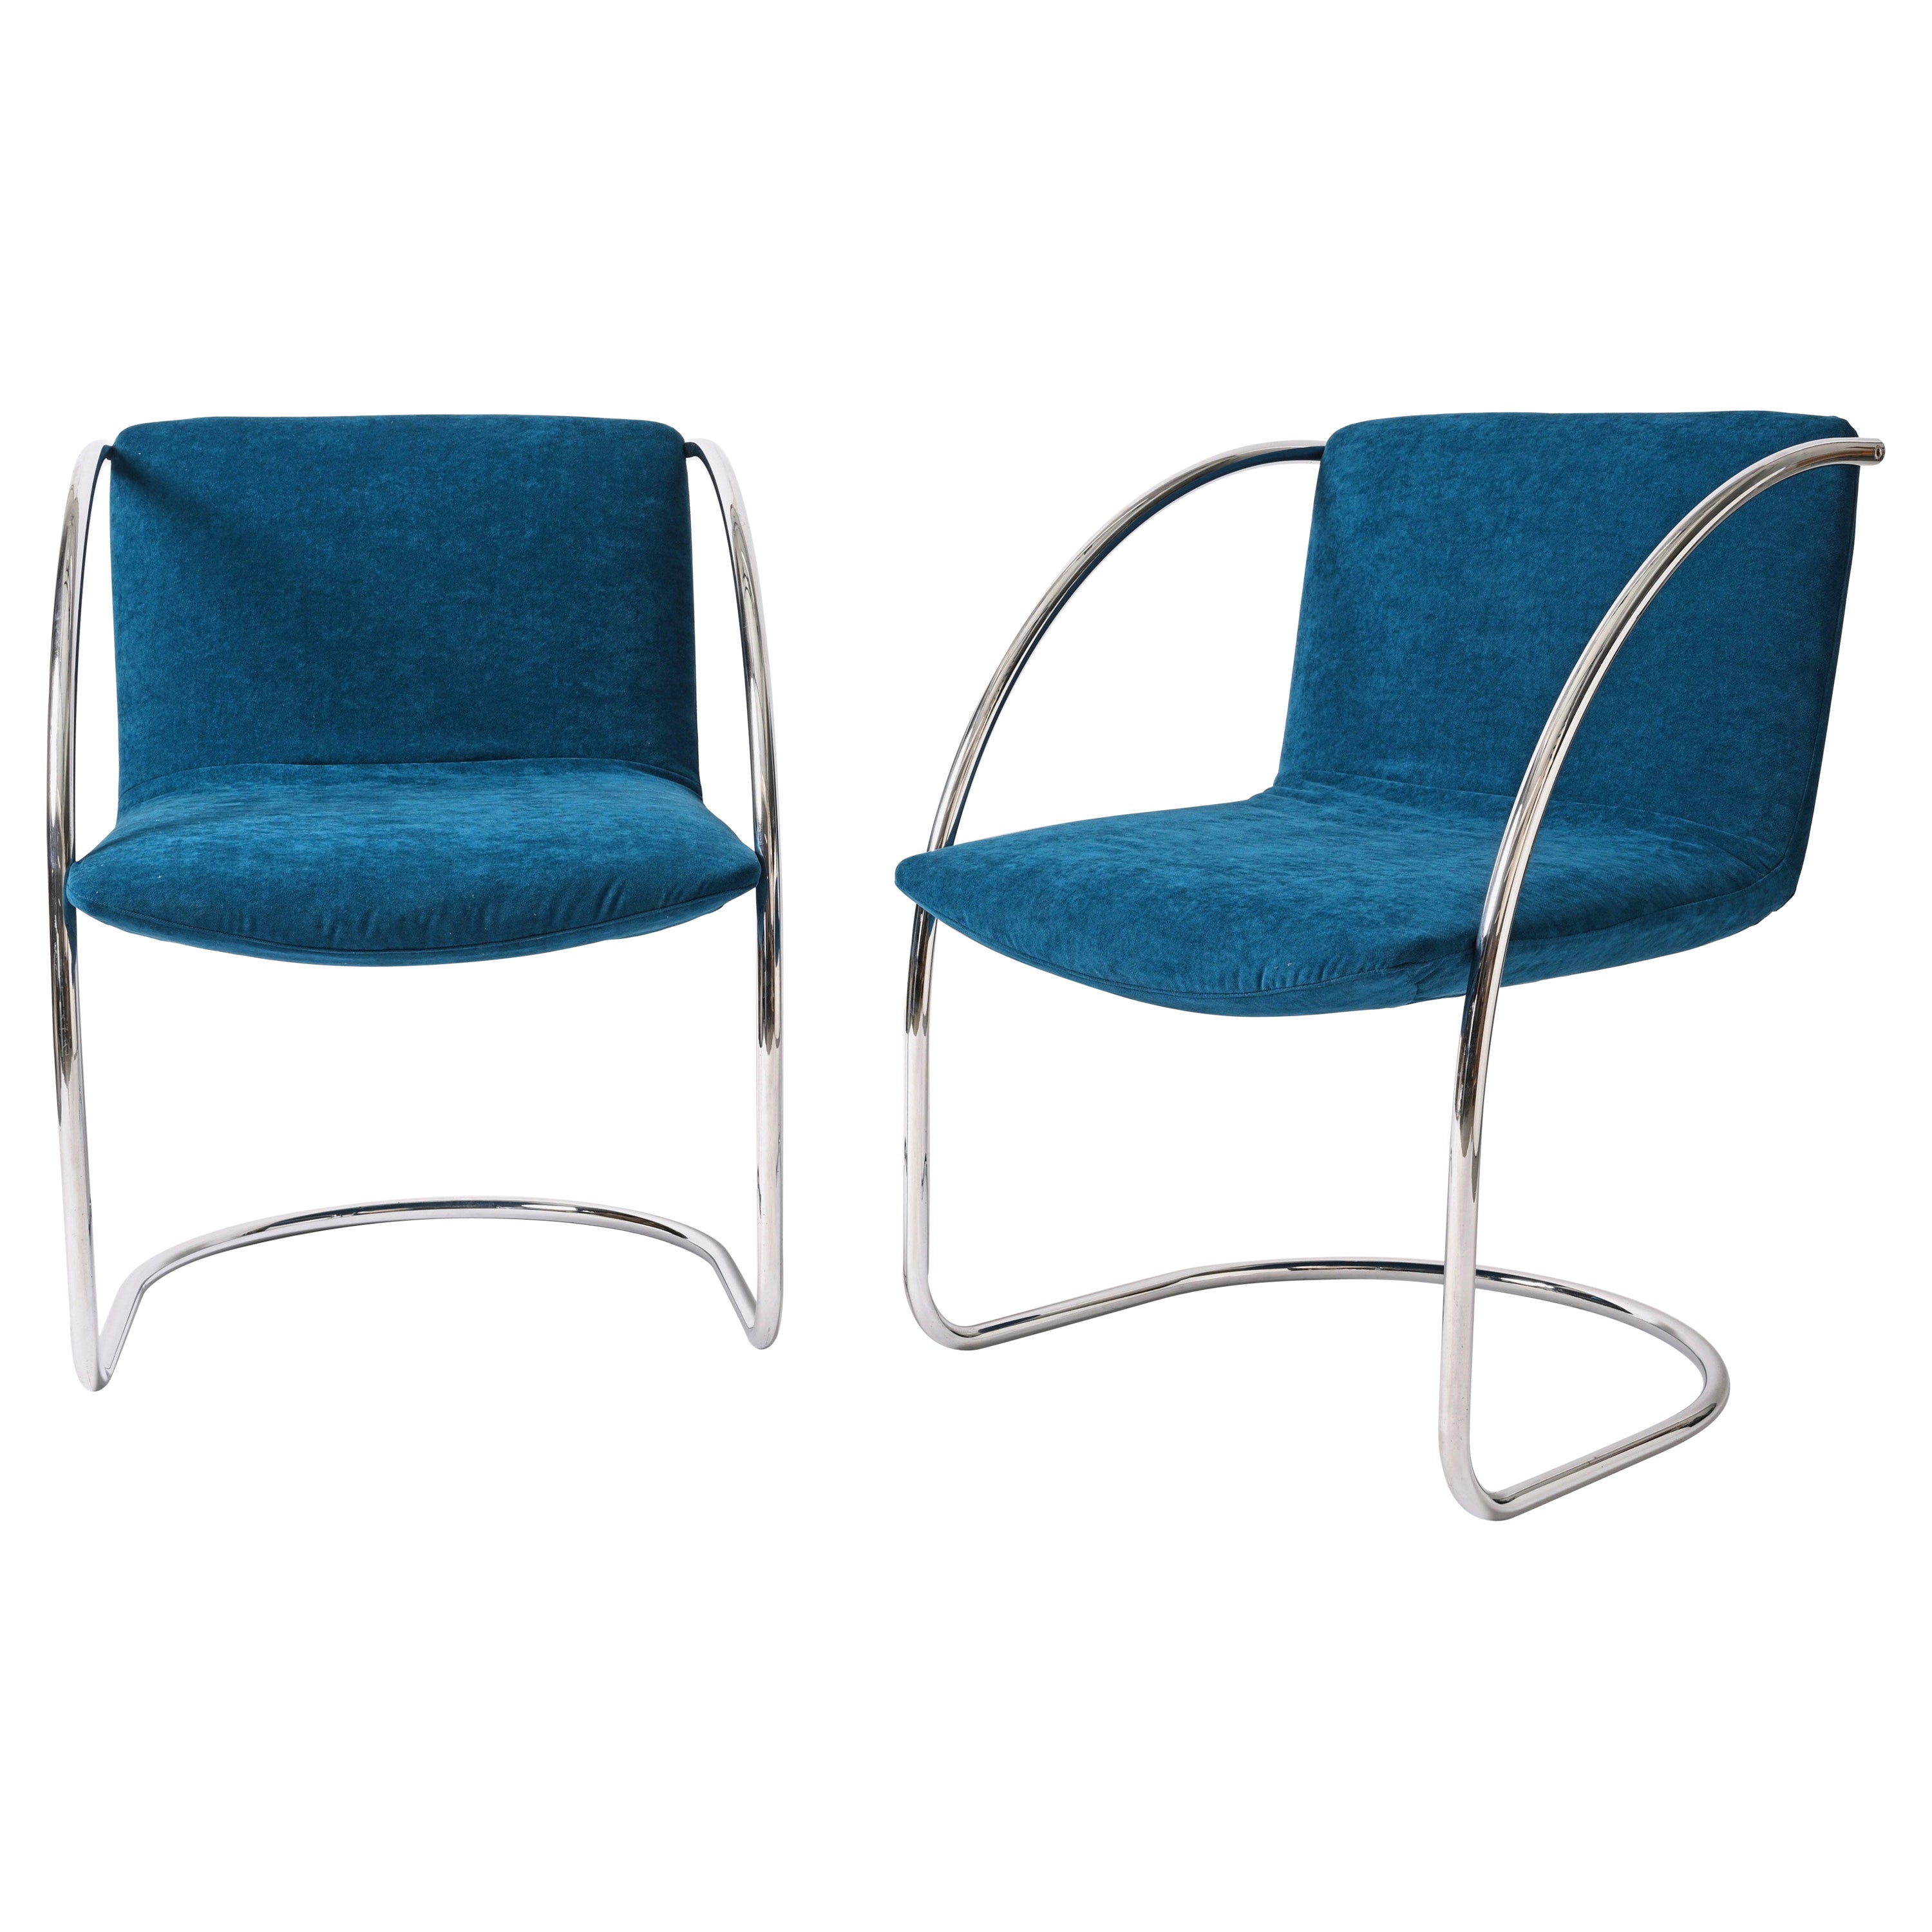 G. Offredi Fabric Blue and Steel Italian Four "Lens" Chairs for Saporiti, 1968